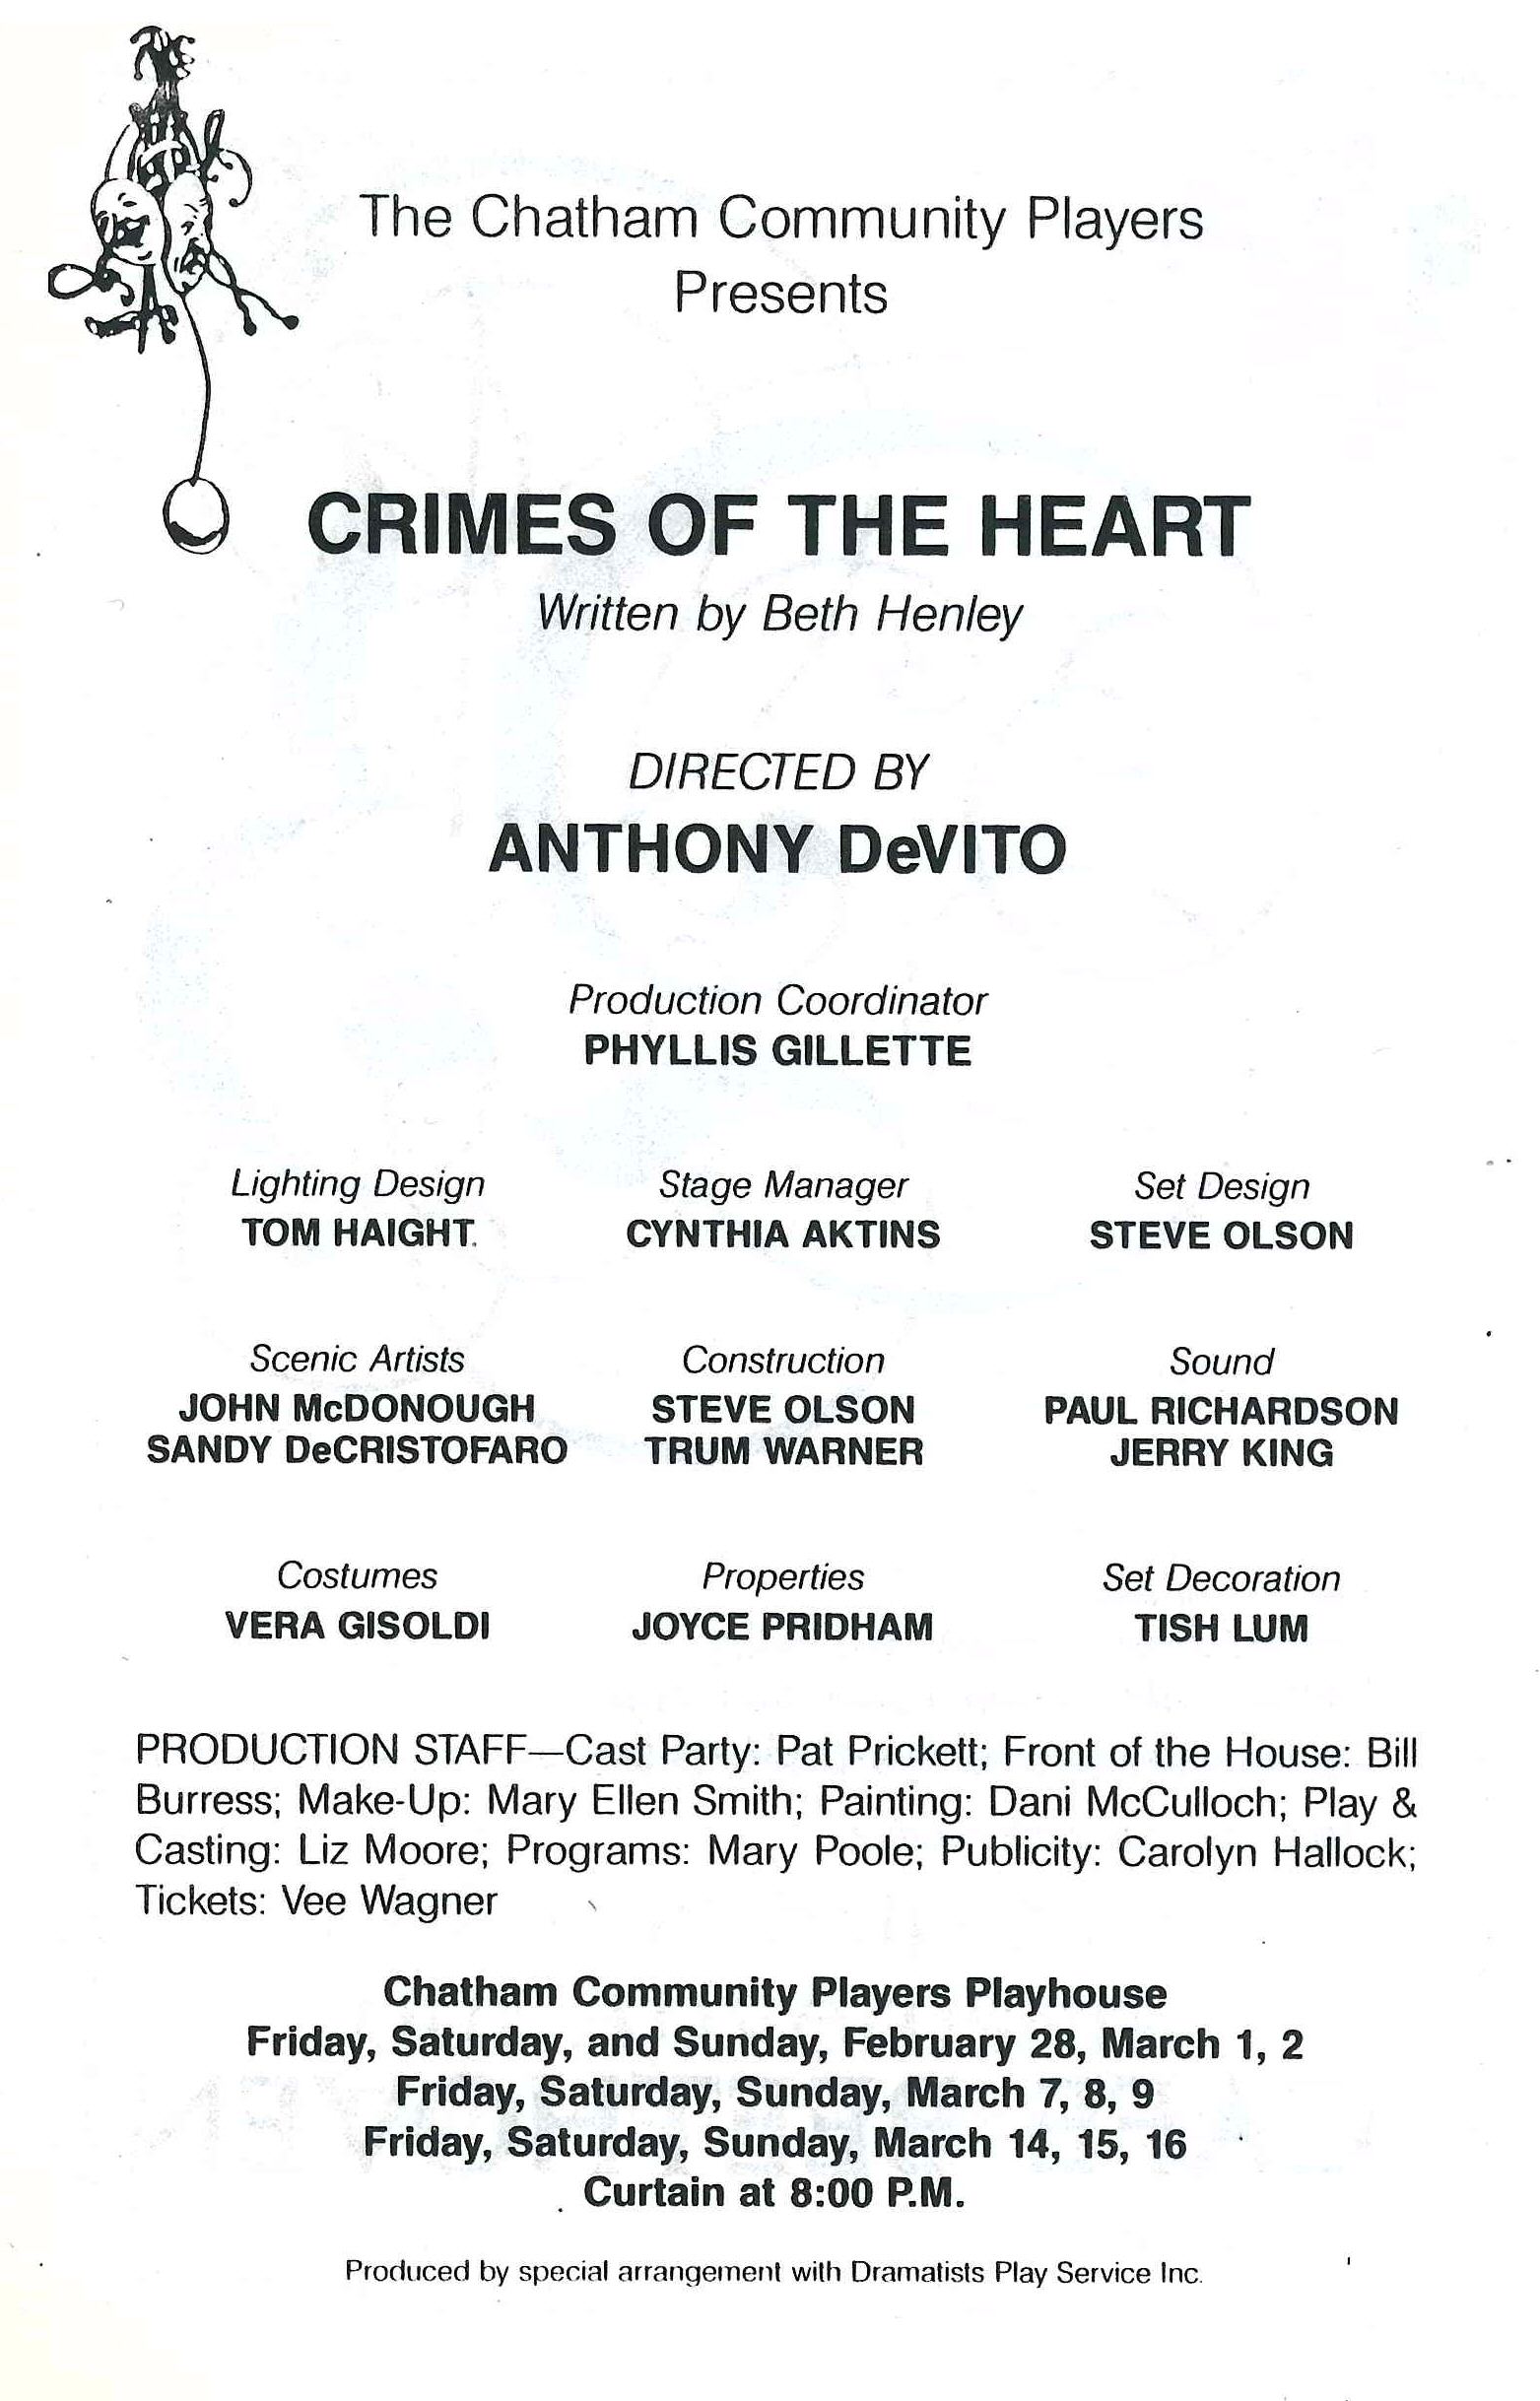 Crimes of the Heart (1985)